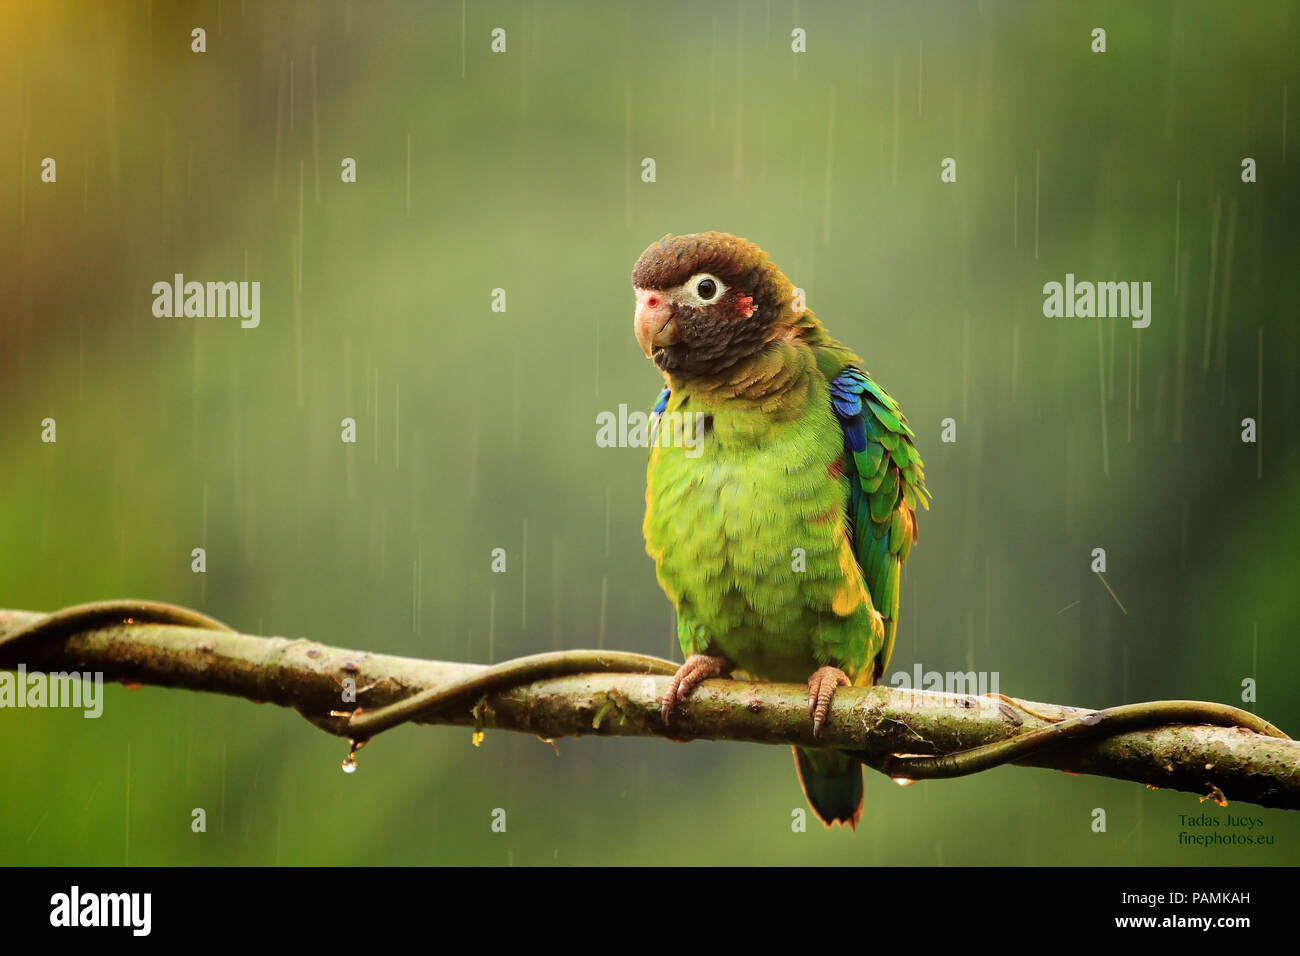 Brown-hooded Parrot on a twig Stock Photo